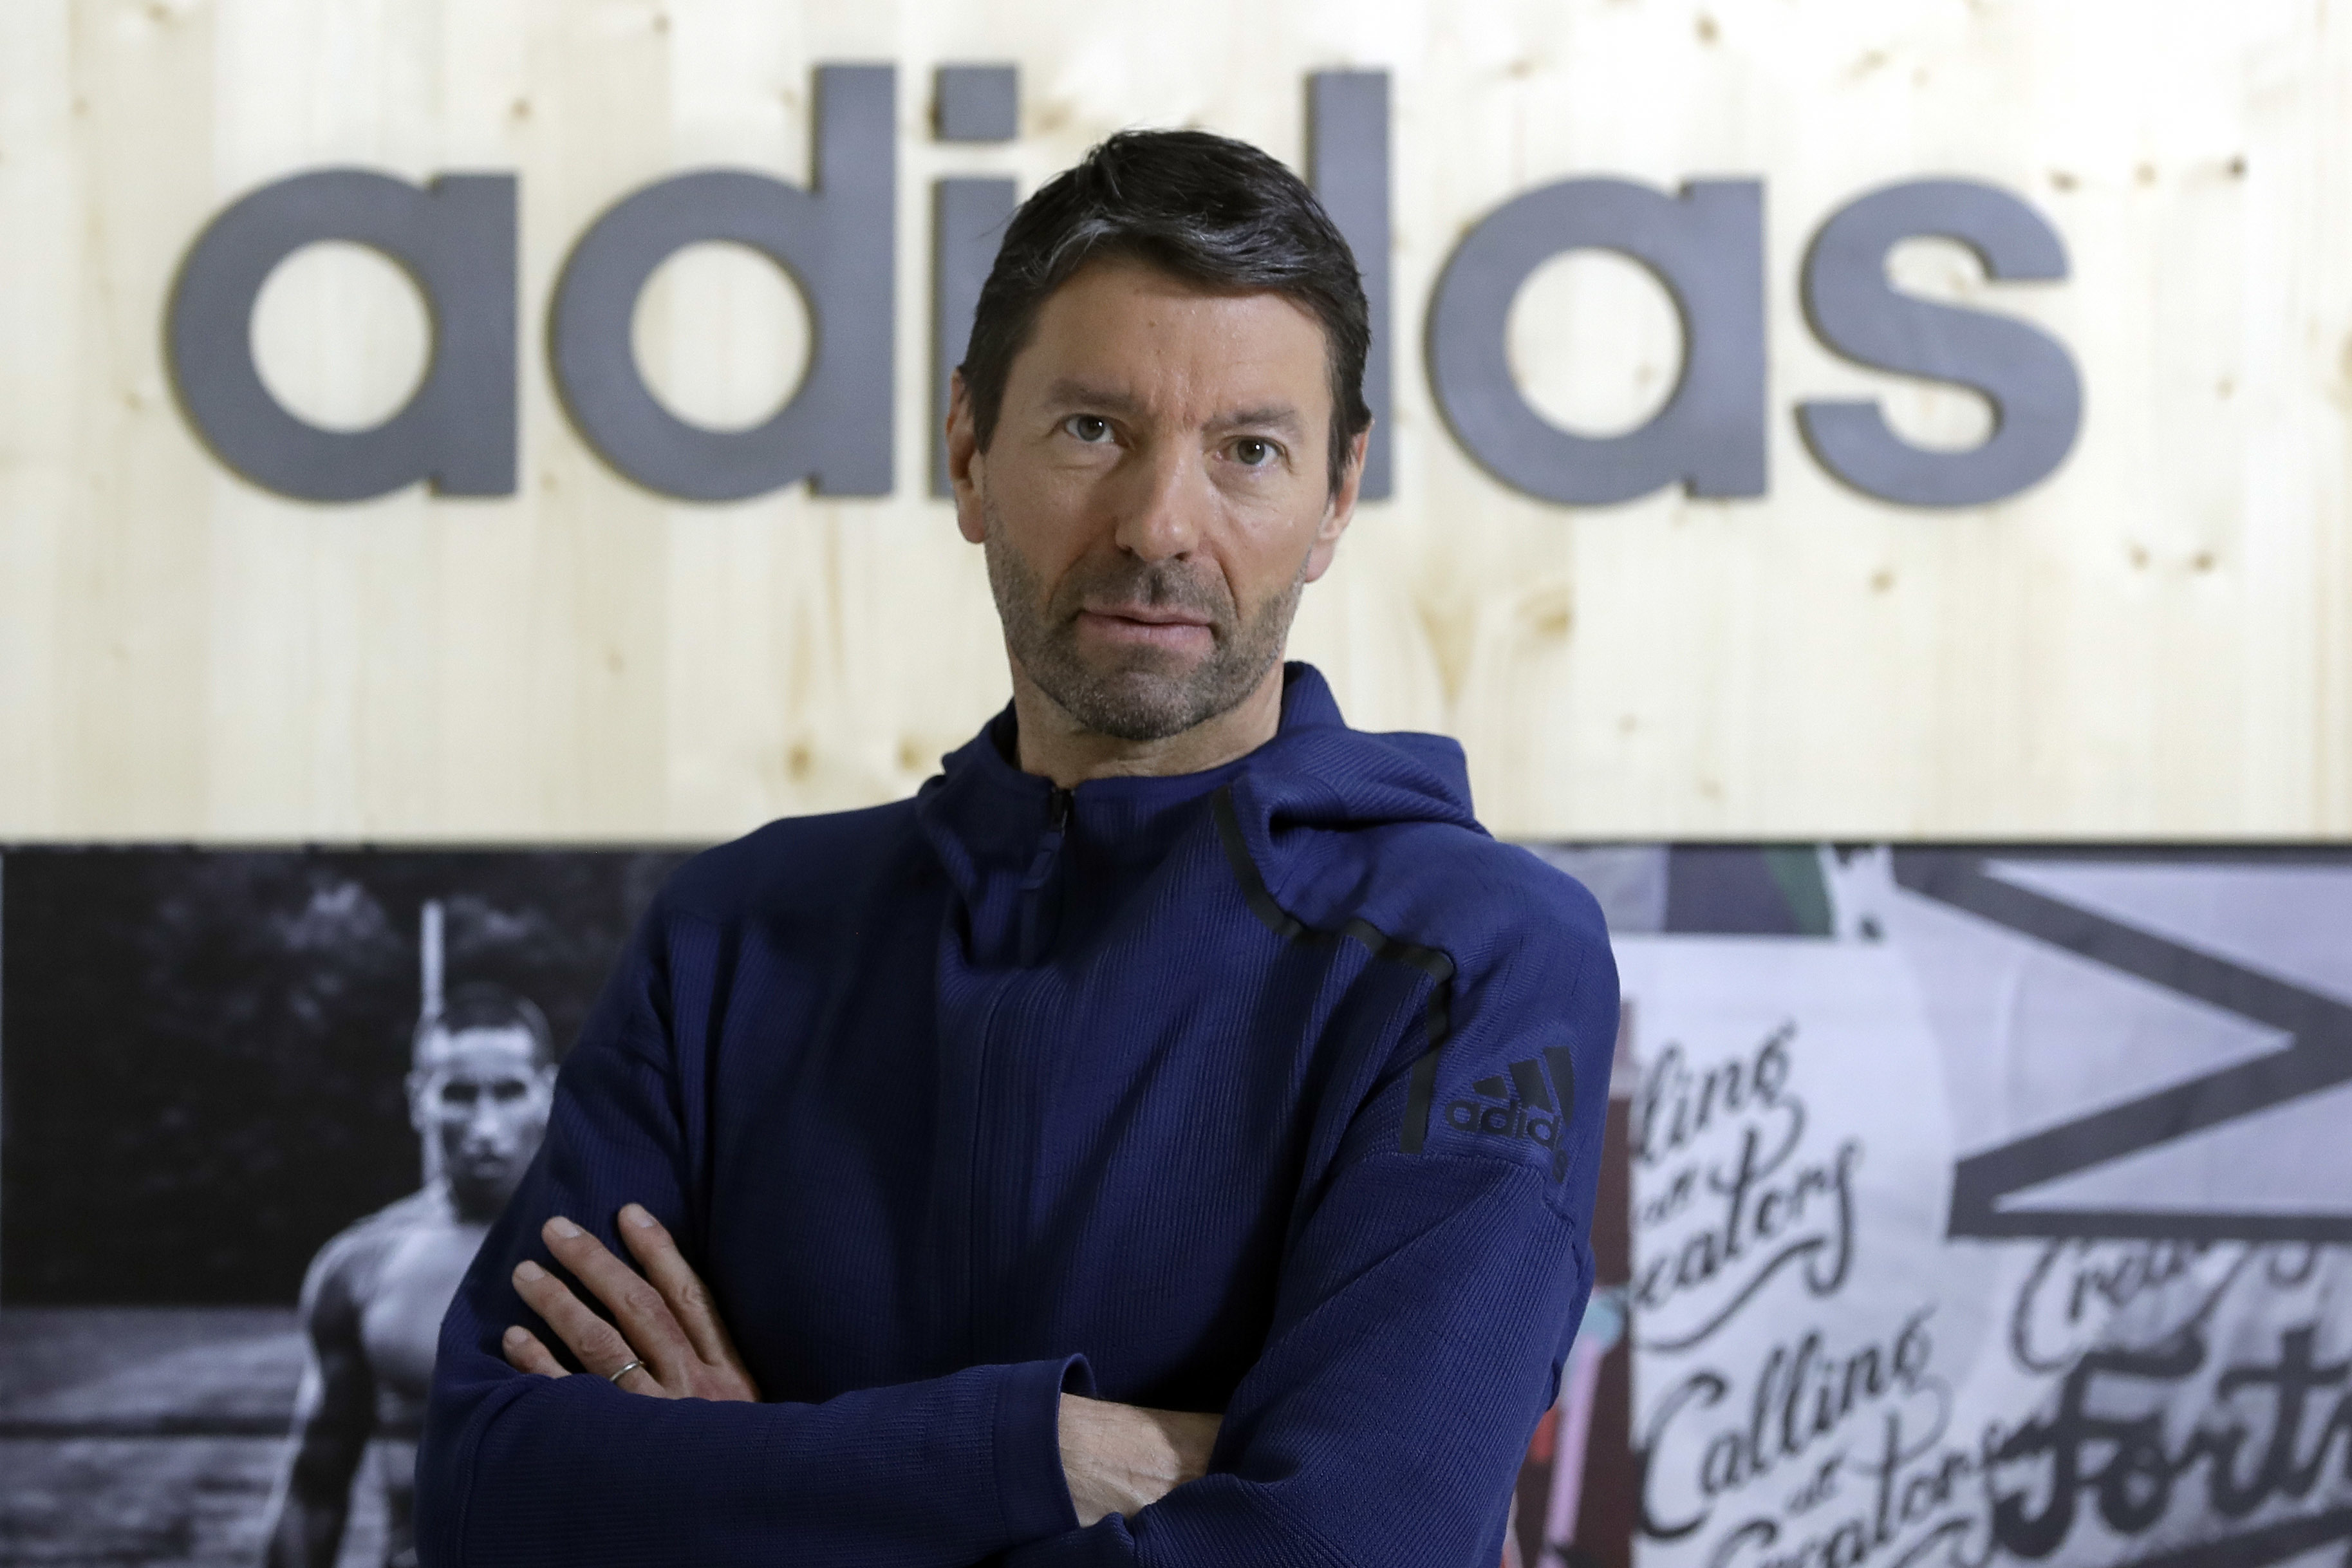 index blouse Repeated Adidas CEO Kasper Rorsted to step down next year - oregonlive.com